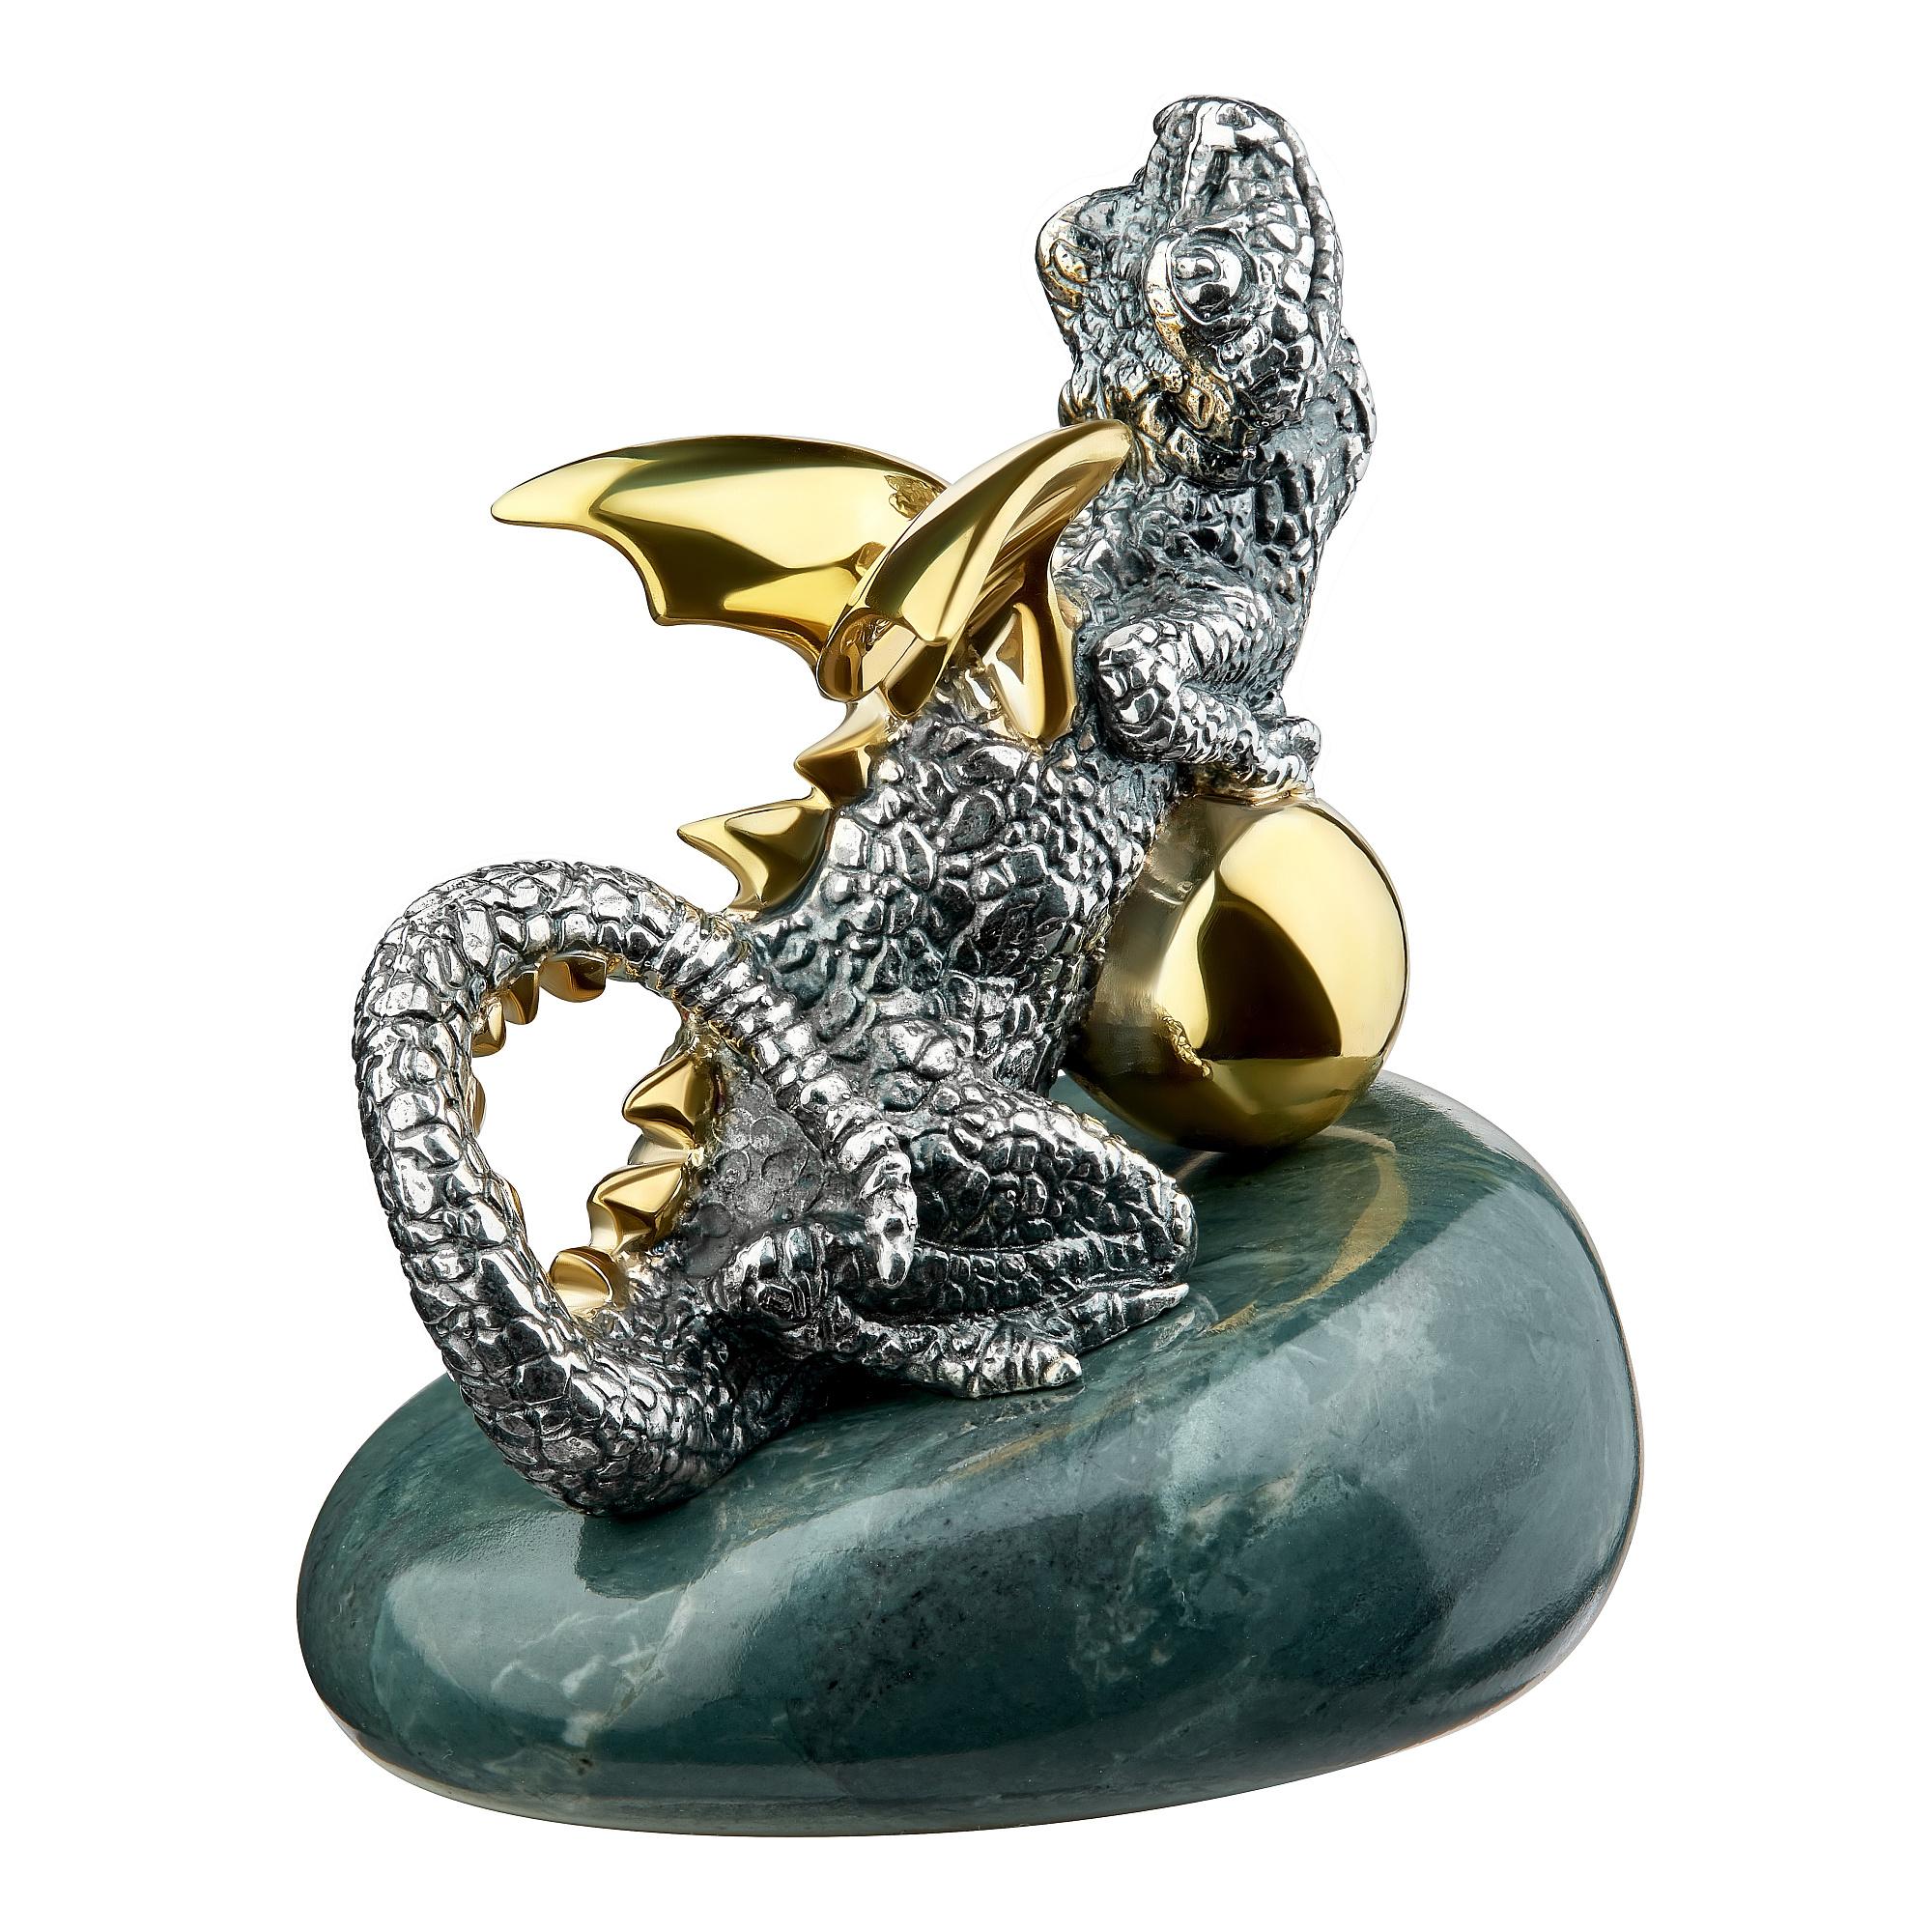 MOISEIKIN's exquisite miniature of Dragon Sculpture – a fusion of artistry, symbolism, and functionality. Crafted and engraved from silver and adorned with gilded carvings, this majestic Winged Dragon captures the essence of wealth and power, making